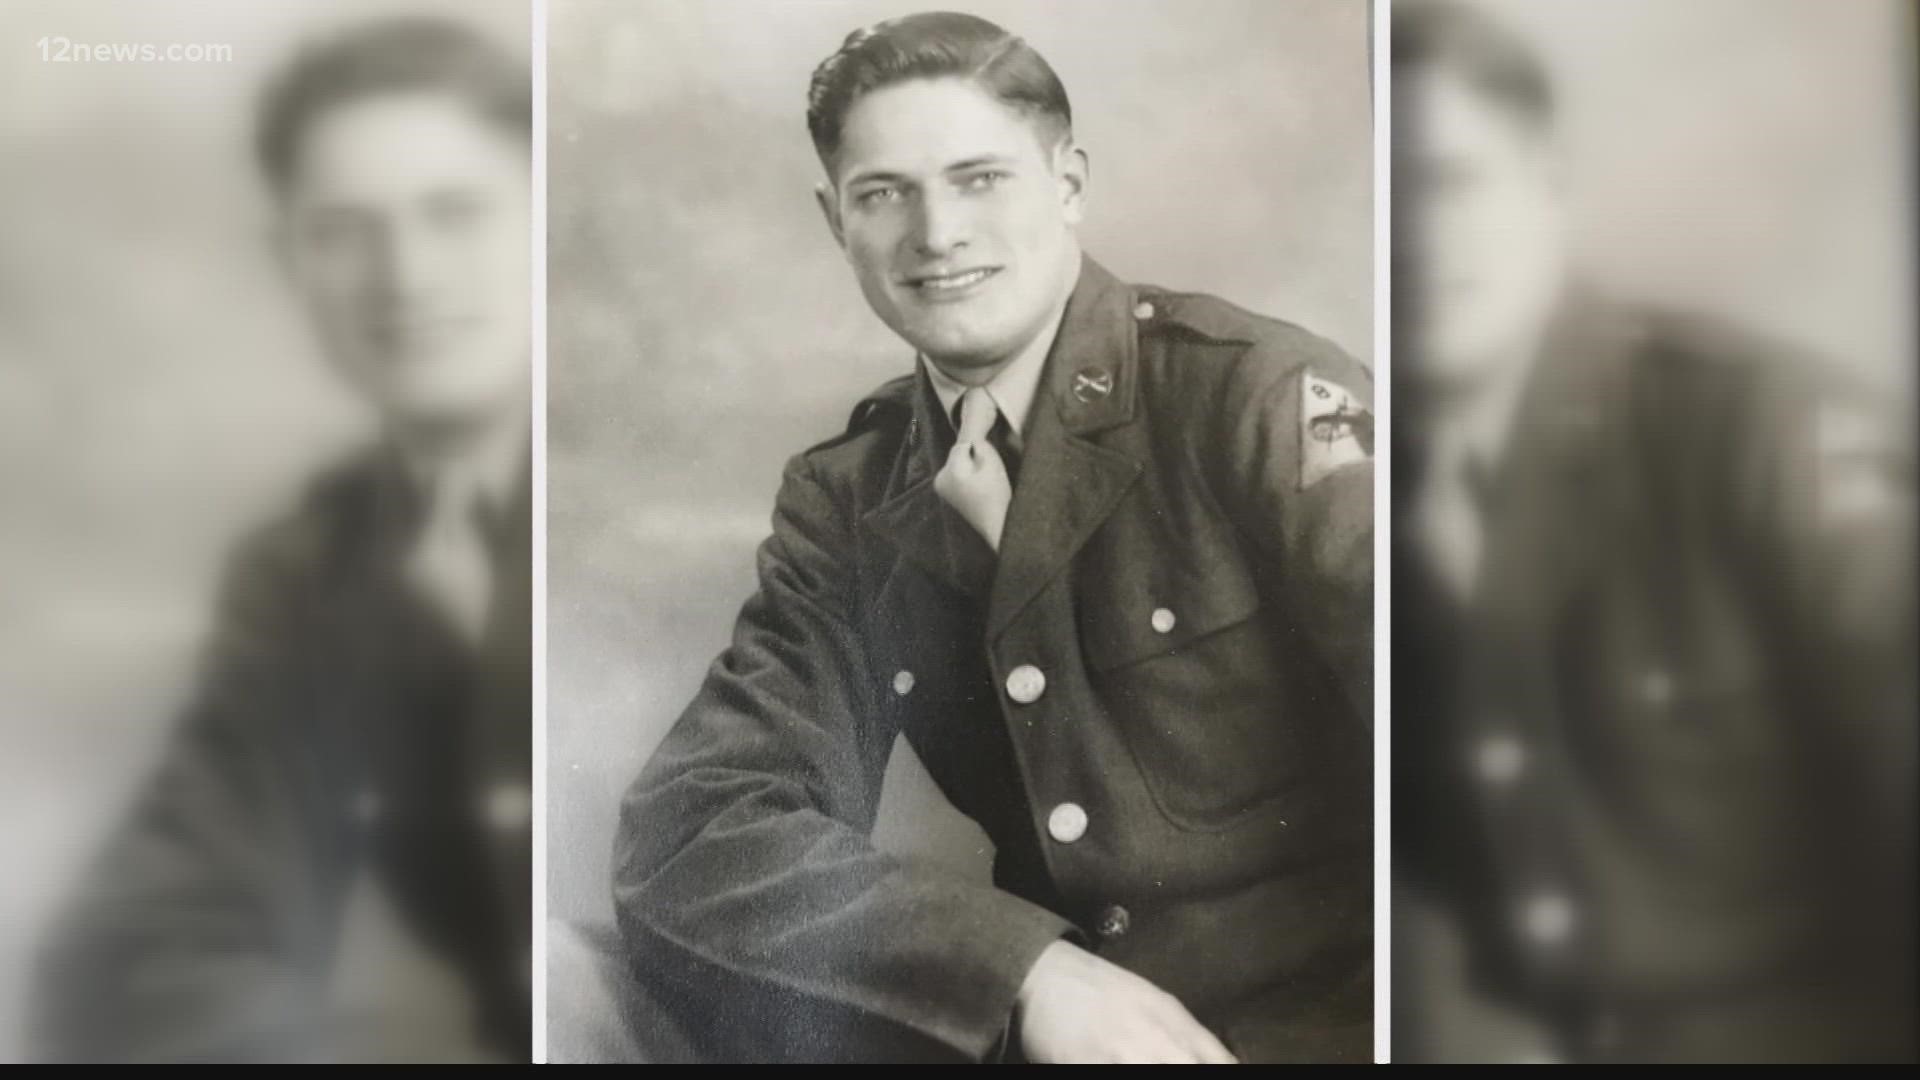 Thanks to the world of social media, the son and grandson of Sgt. Clifford Voigt had the chance to meet the man who found his dog tags in a Michigan river.